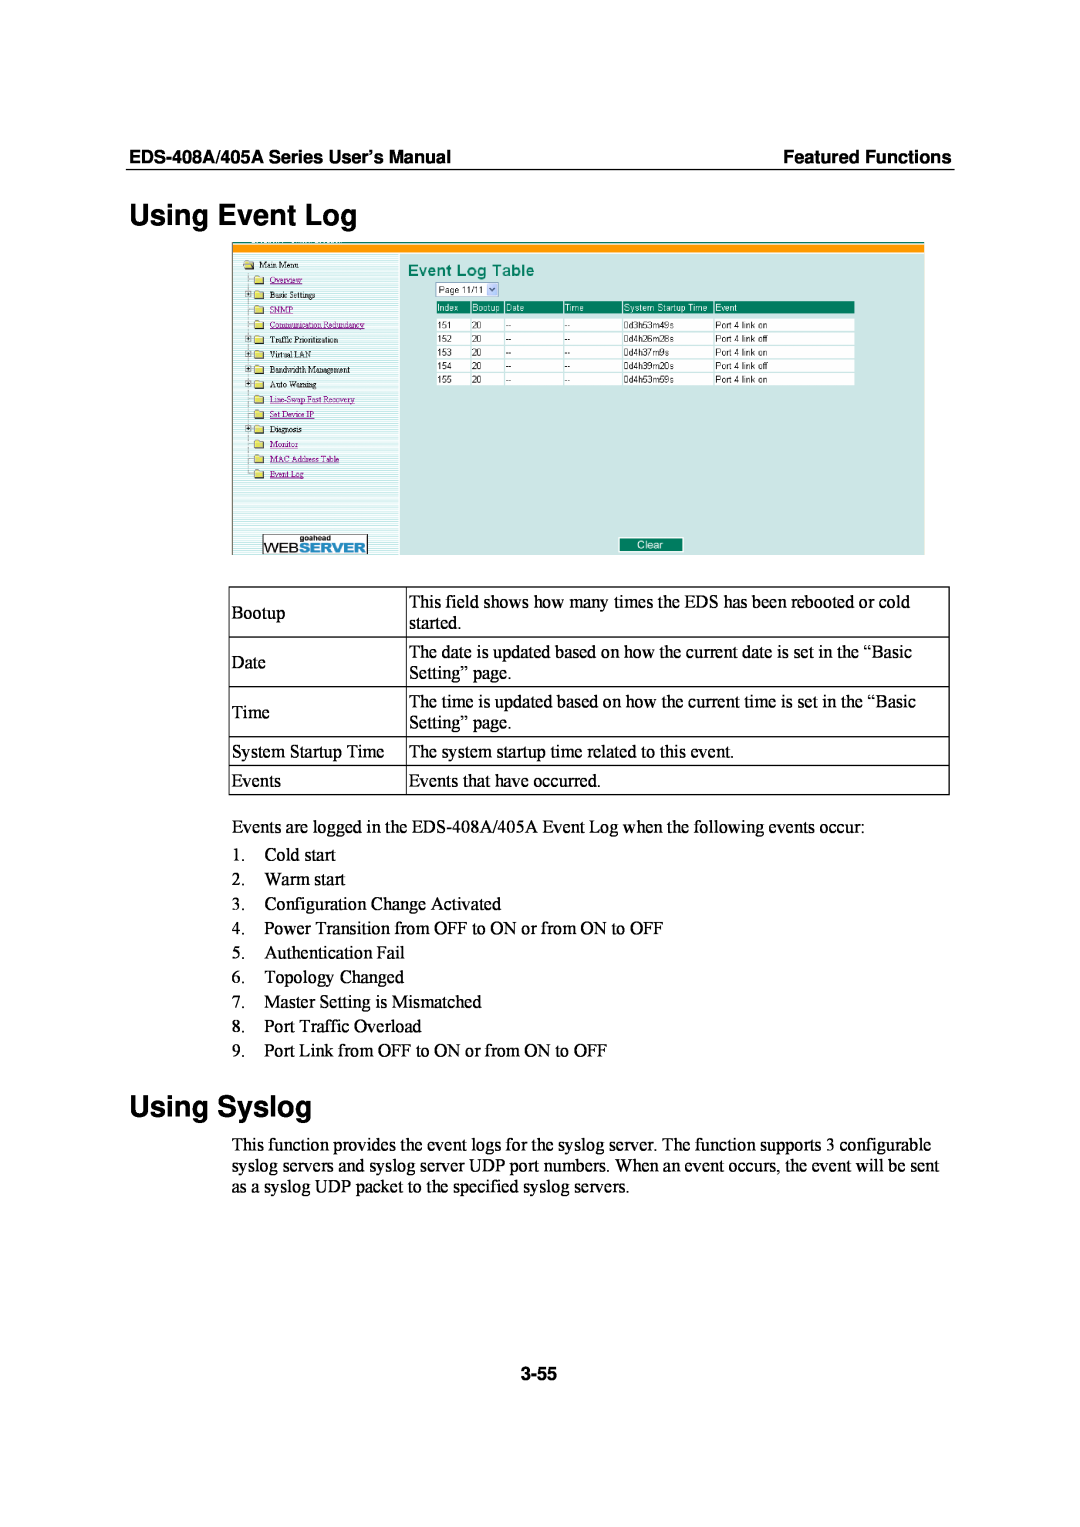 Moxa Technologies EDS-405A Using Event Log, Using Syslog, 3-55, EDS-408A/405A Series User’s Manual, Featured Functions 